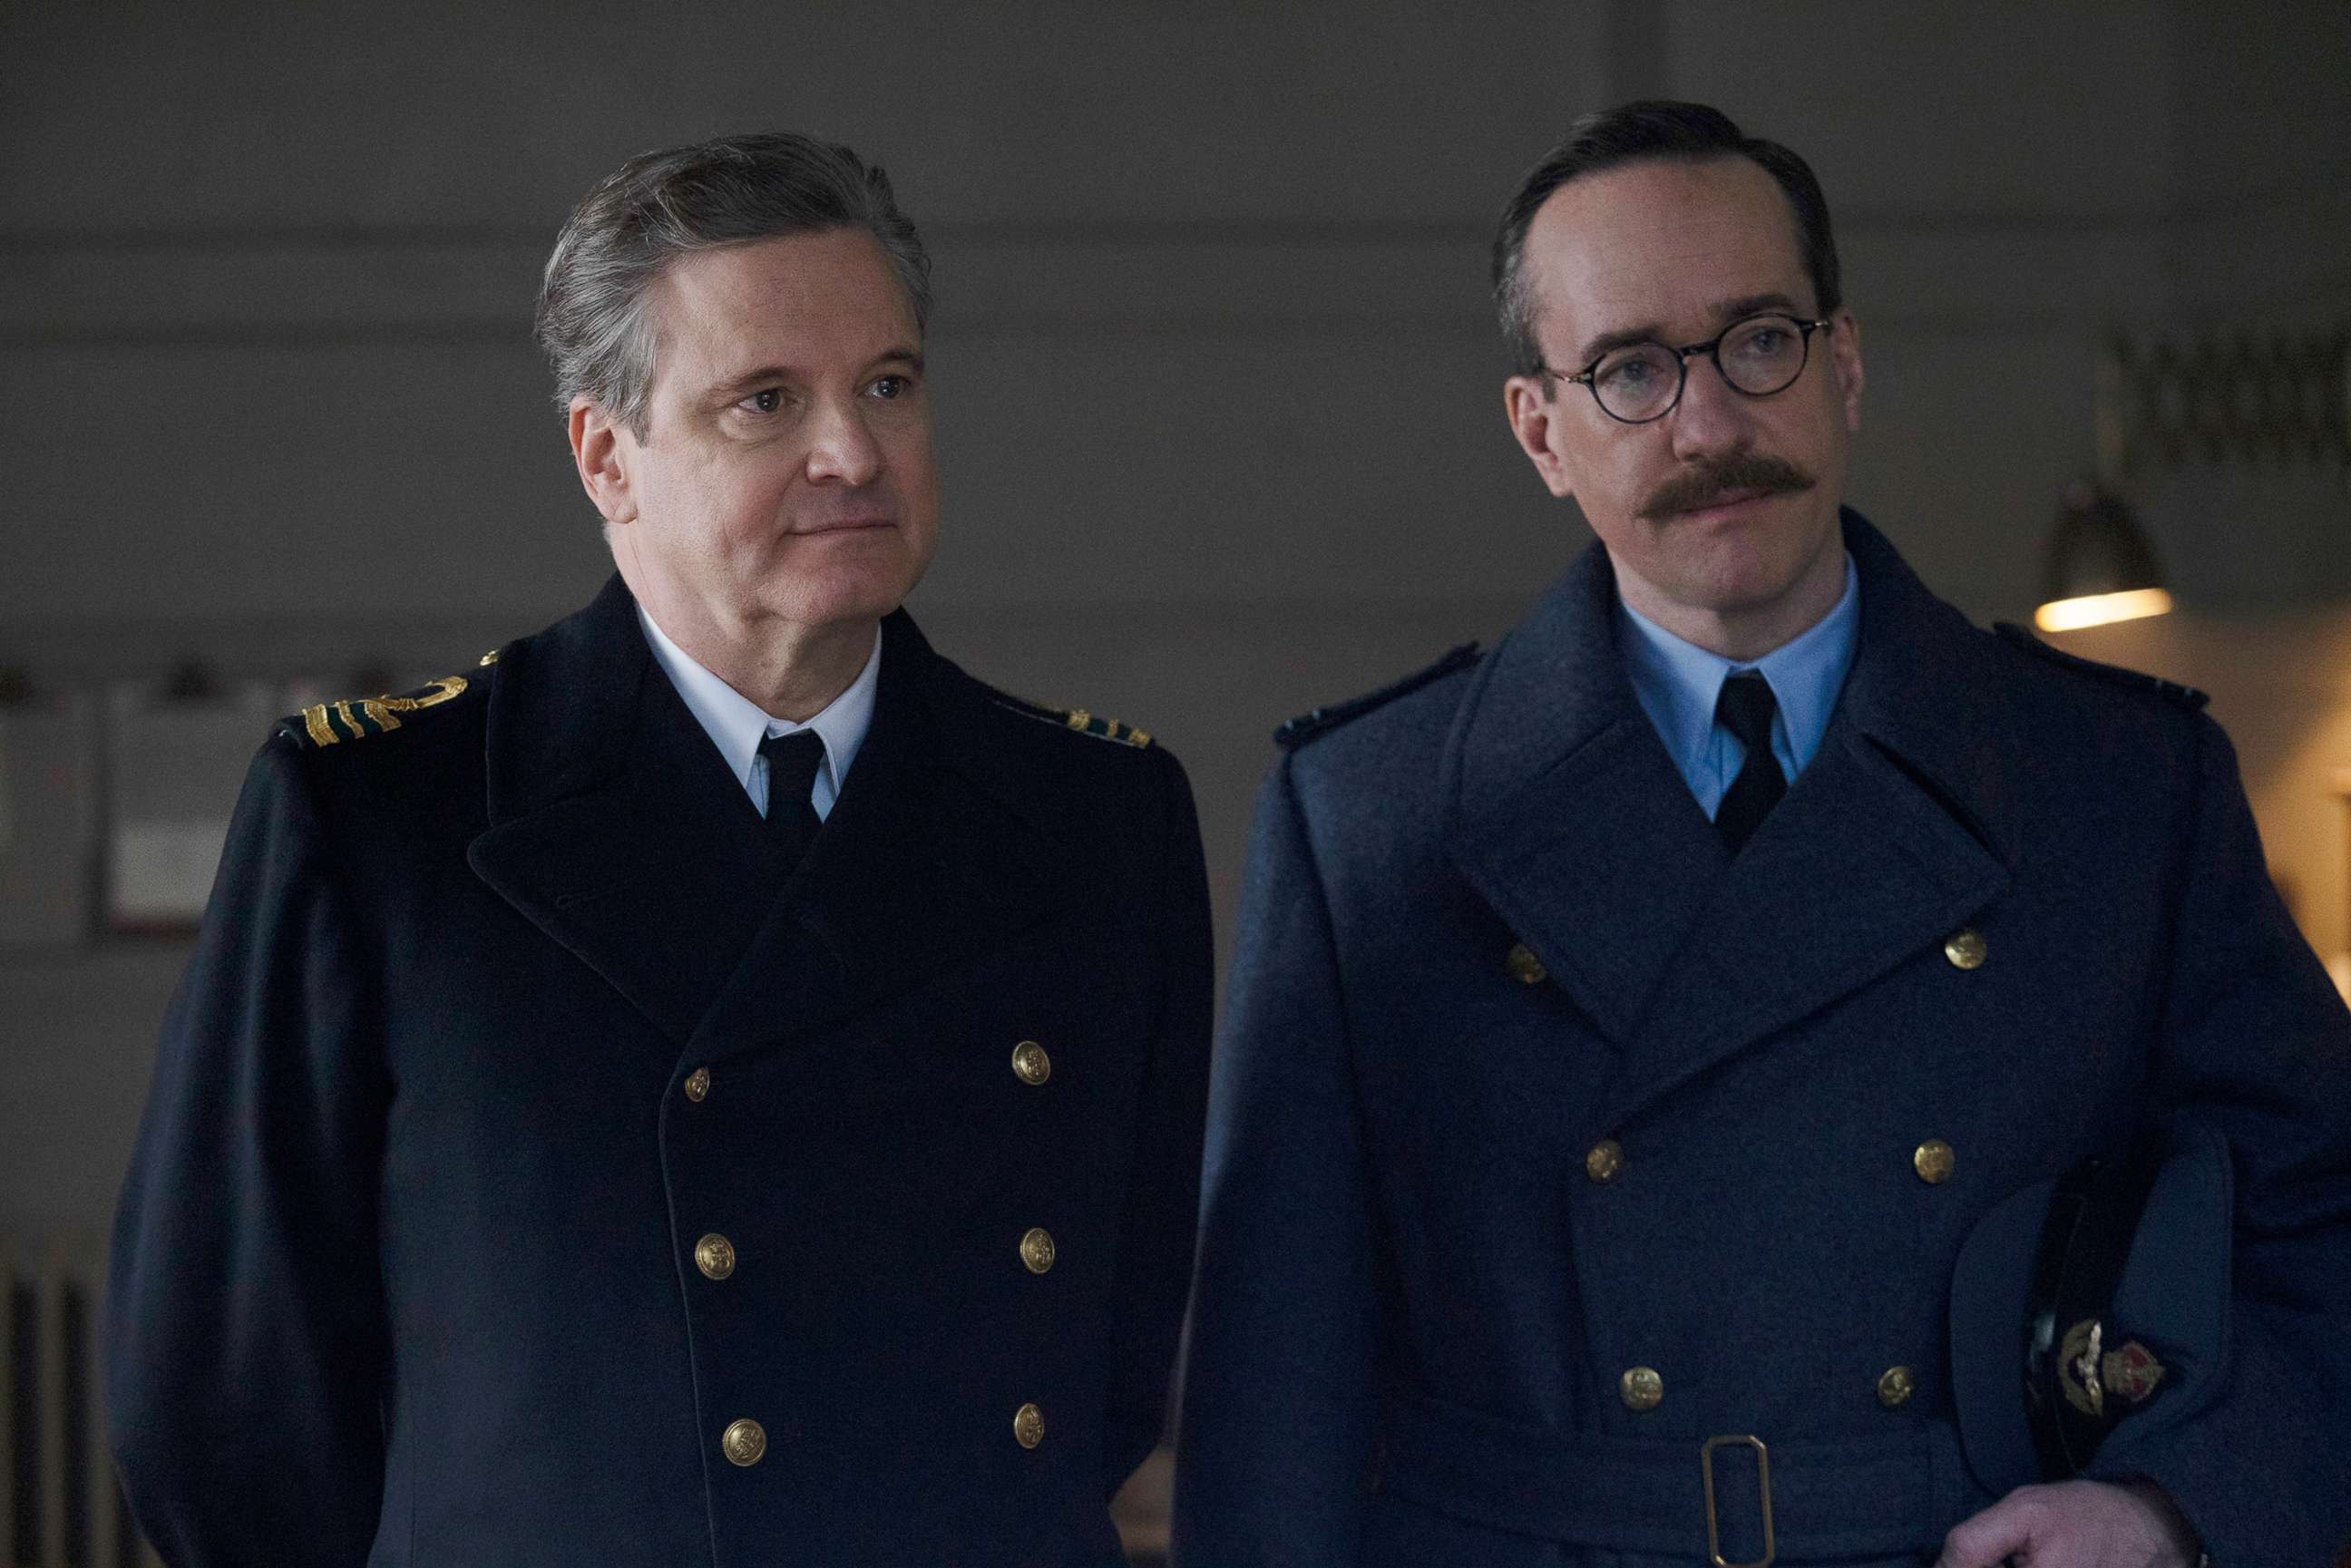 PHOTO: Colin Firth as Ewen Montagu and Matthew Macfadyen as Charles Cholmondeley in a scene from "Operation Mincemeat."